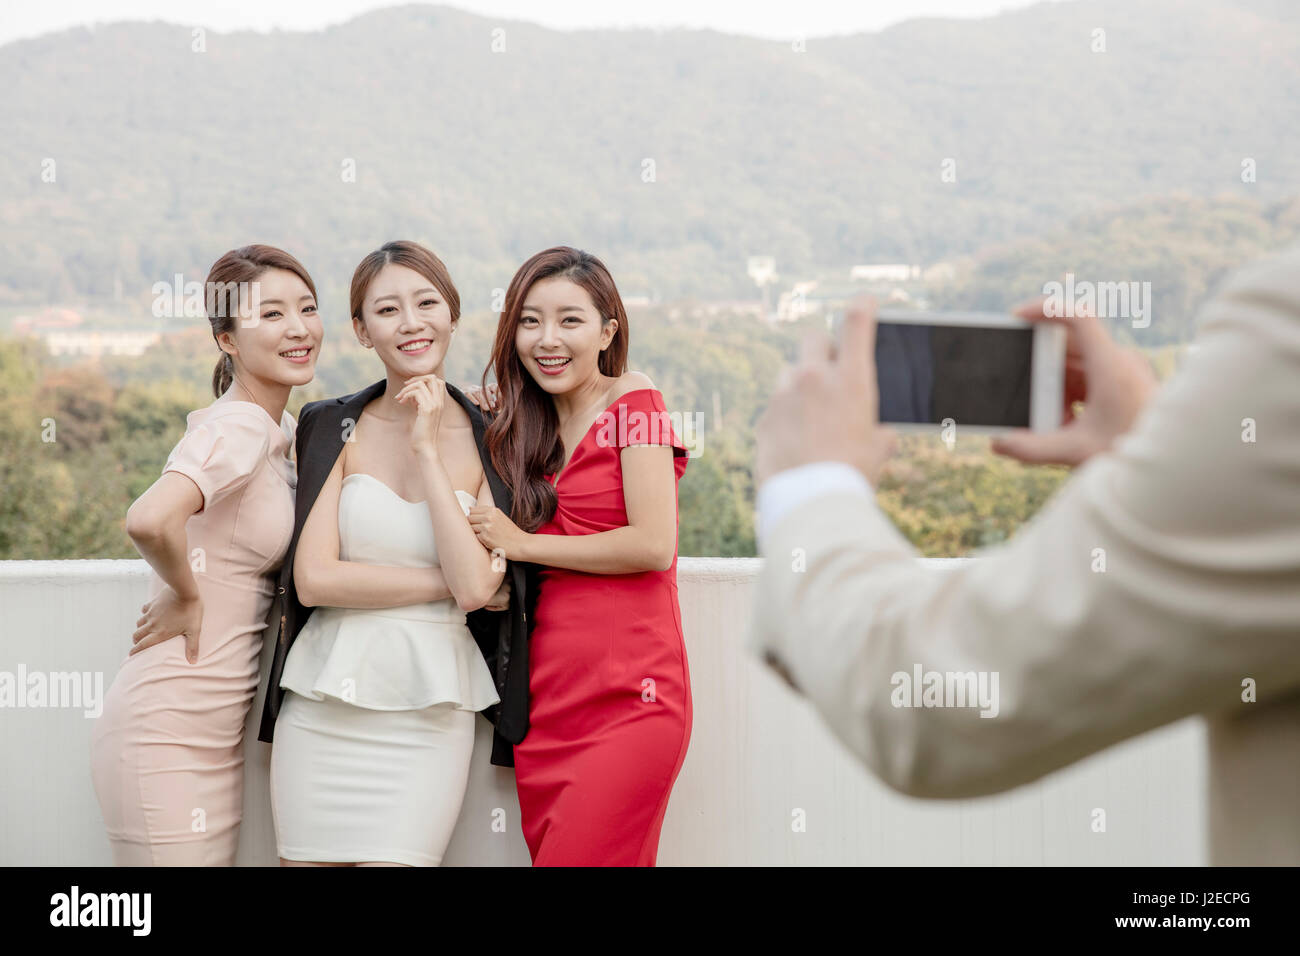 Three young smiling women posing for photos at party on rooftop Stock Photo